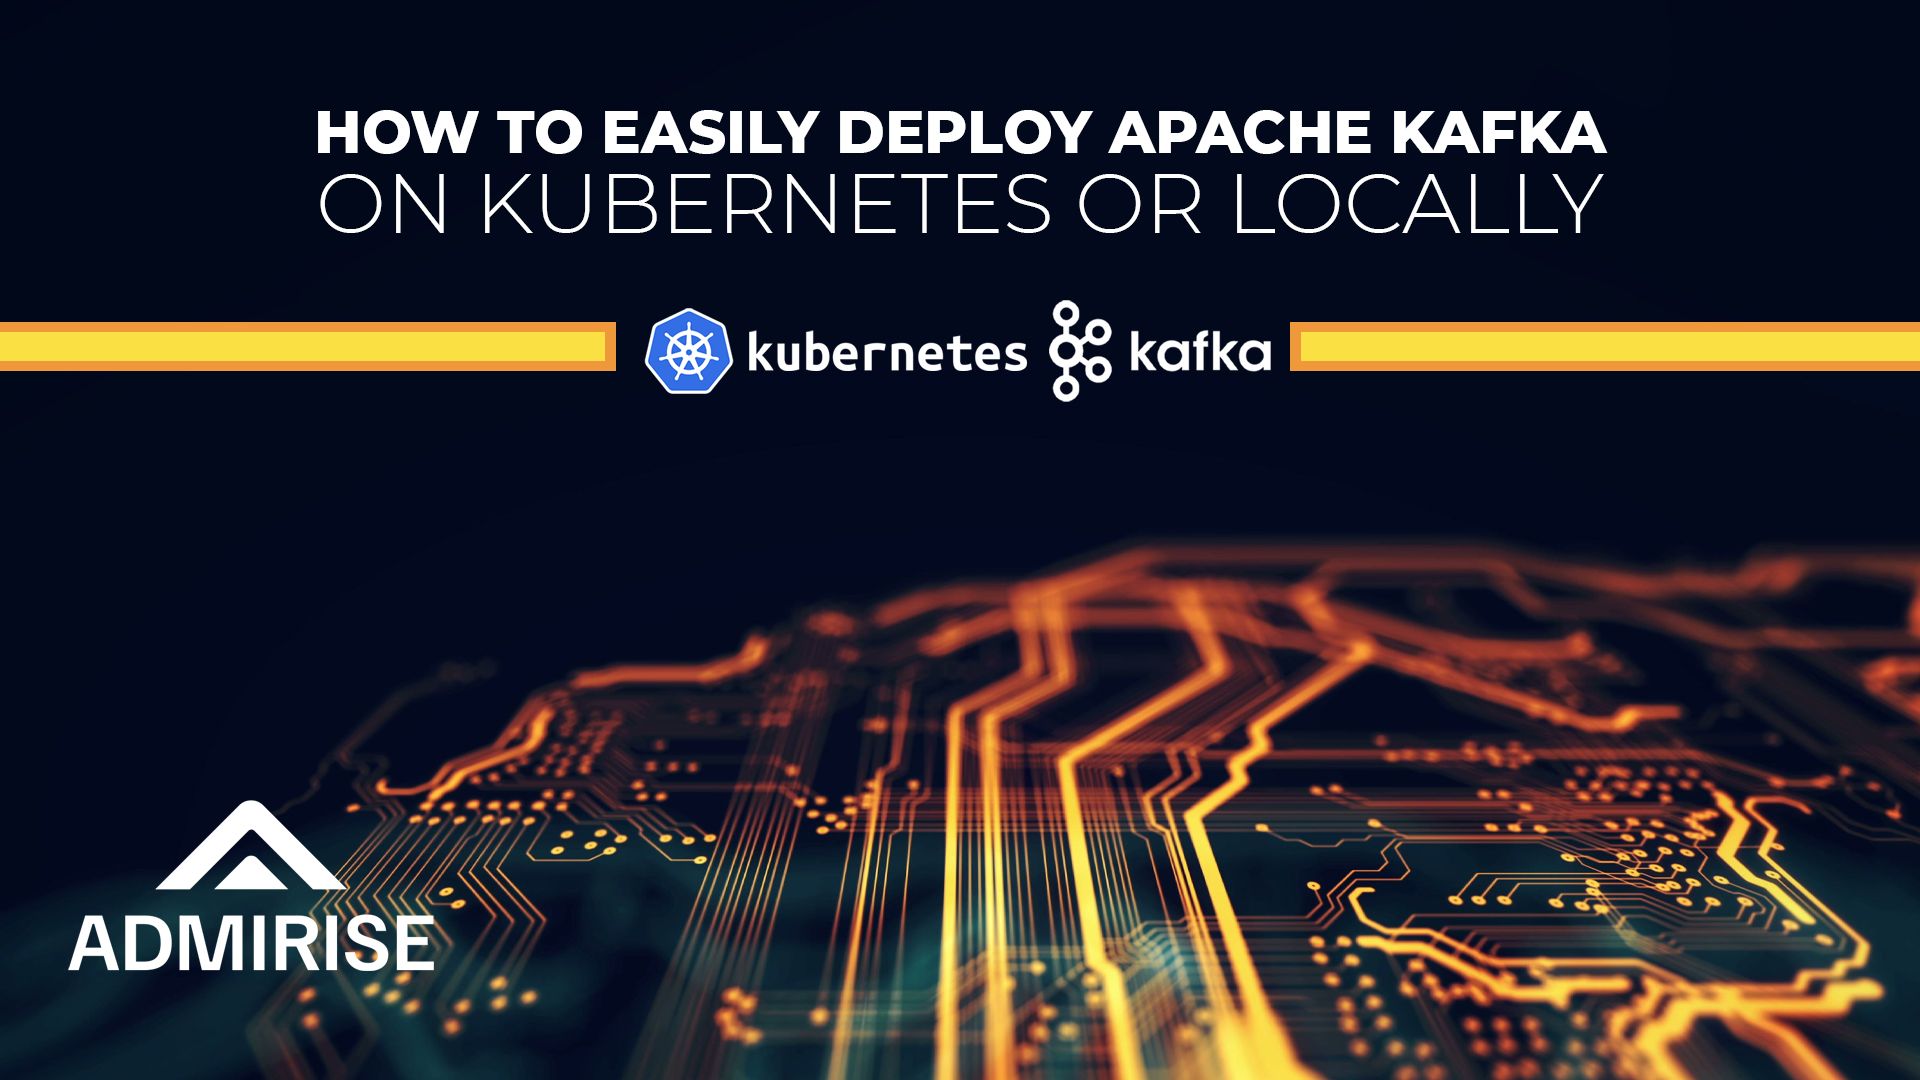 How to Easily Deploy Apache Kafka on Kubernetes or Locally